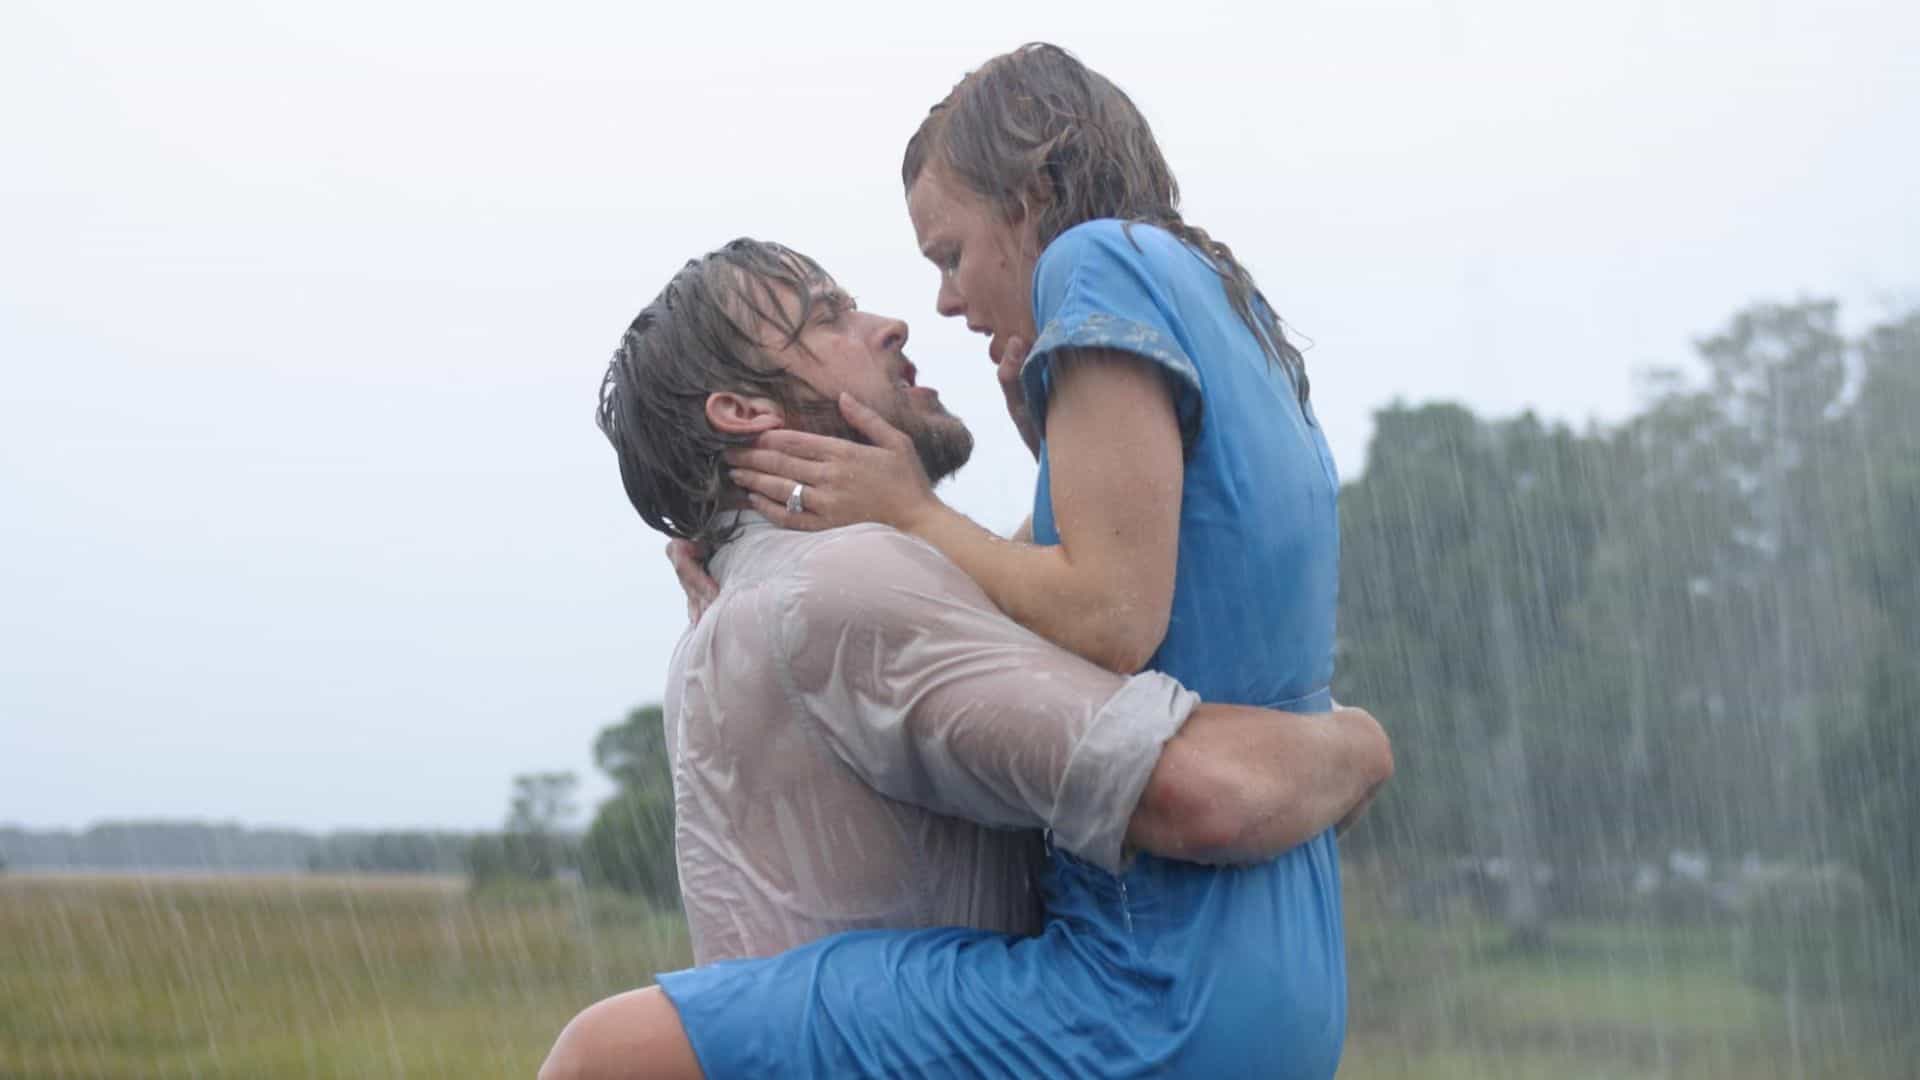 A man embraces a woman in a blue dress while standing in the rain in this image from New Line Cinema.